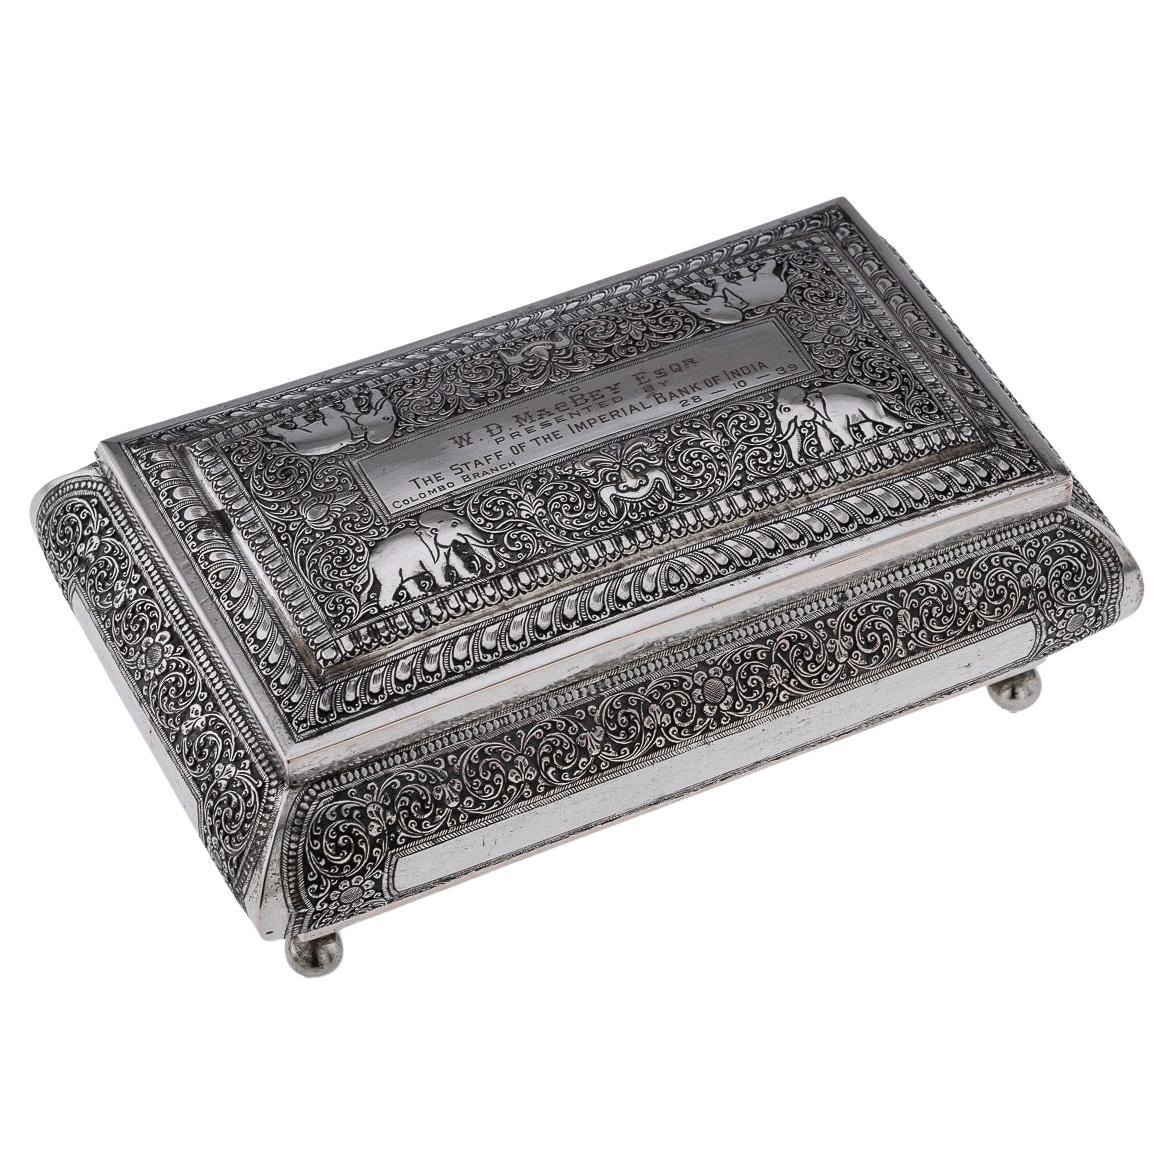 Mid 20th Century Sri Lankan Solid Silver Repousse Box, Colombo c.1930 For Sale